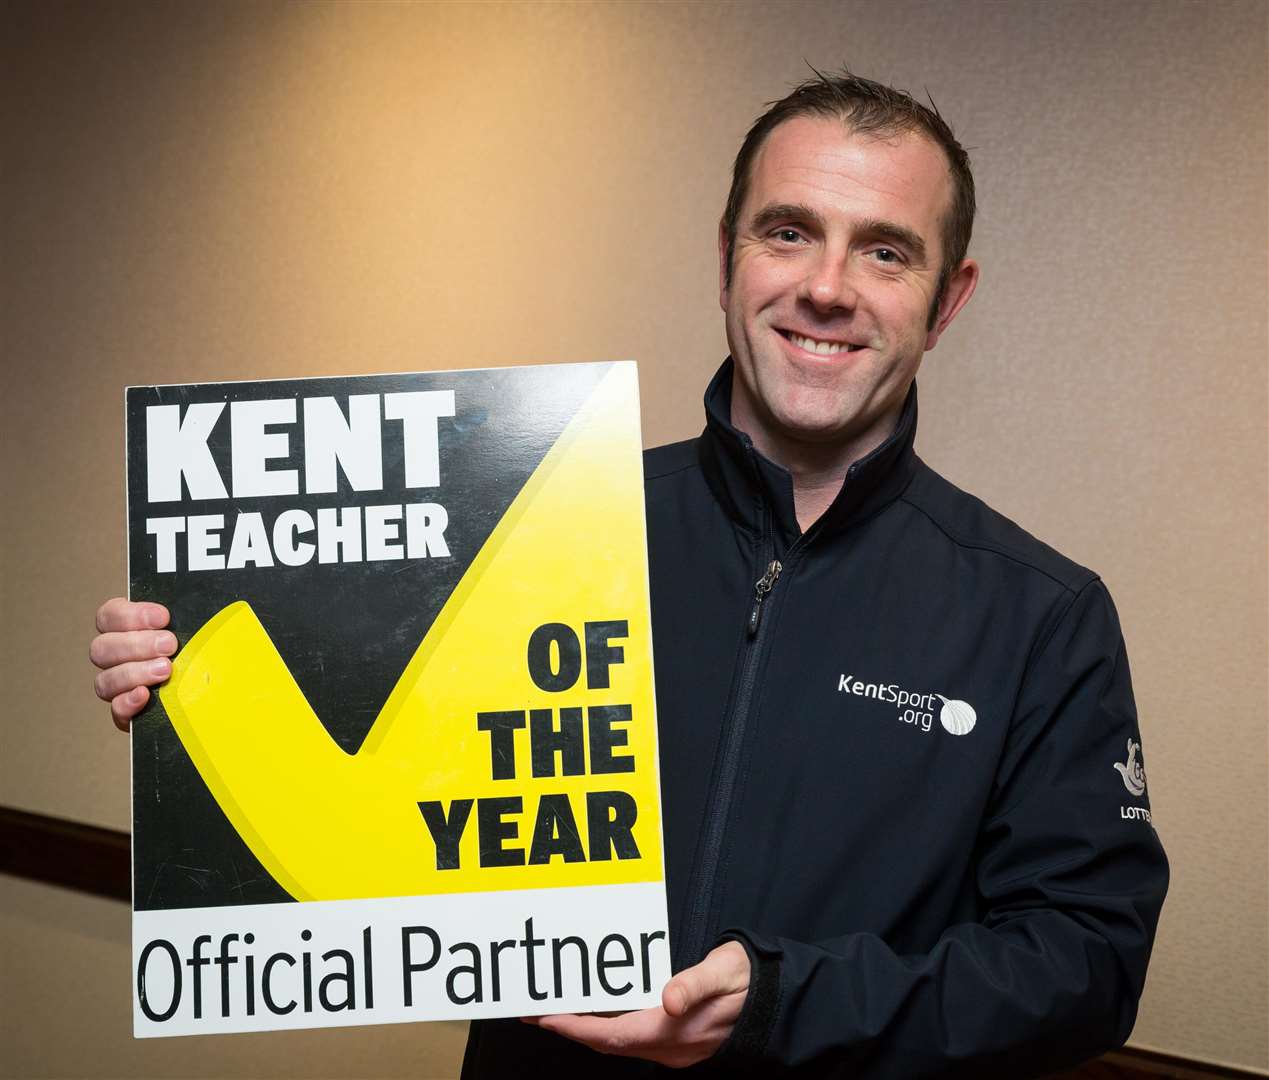 Stuart Butler, Voluntary Sector Development Officer at Kent Sport, is backing the physical education category at the Kent Teacher of the Year Awards.